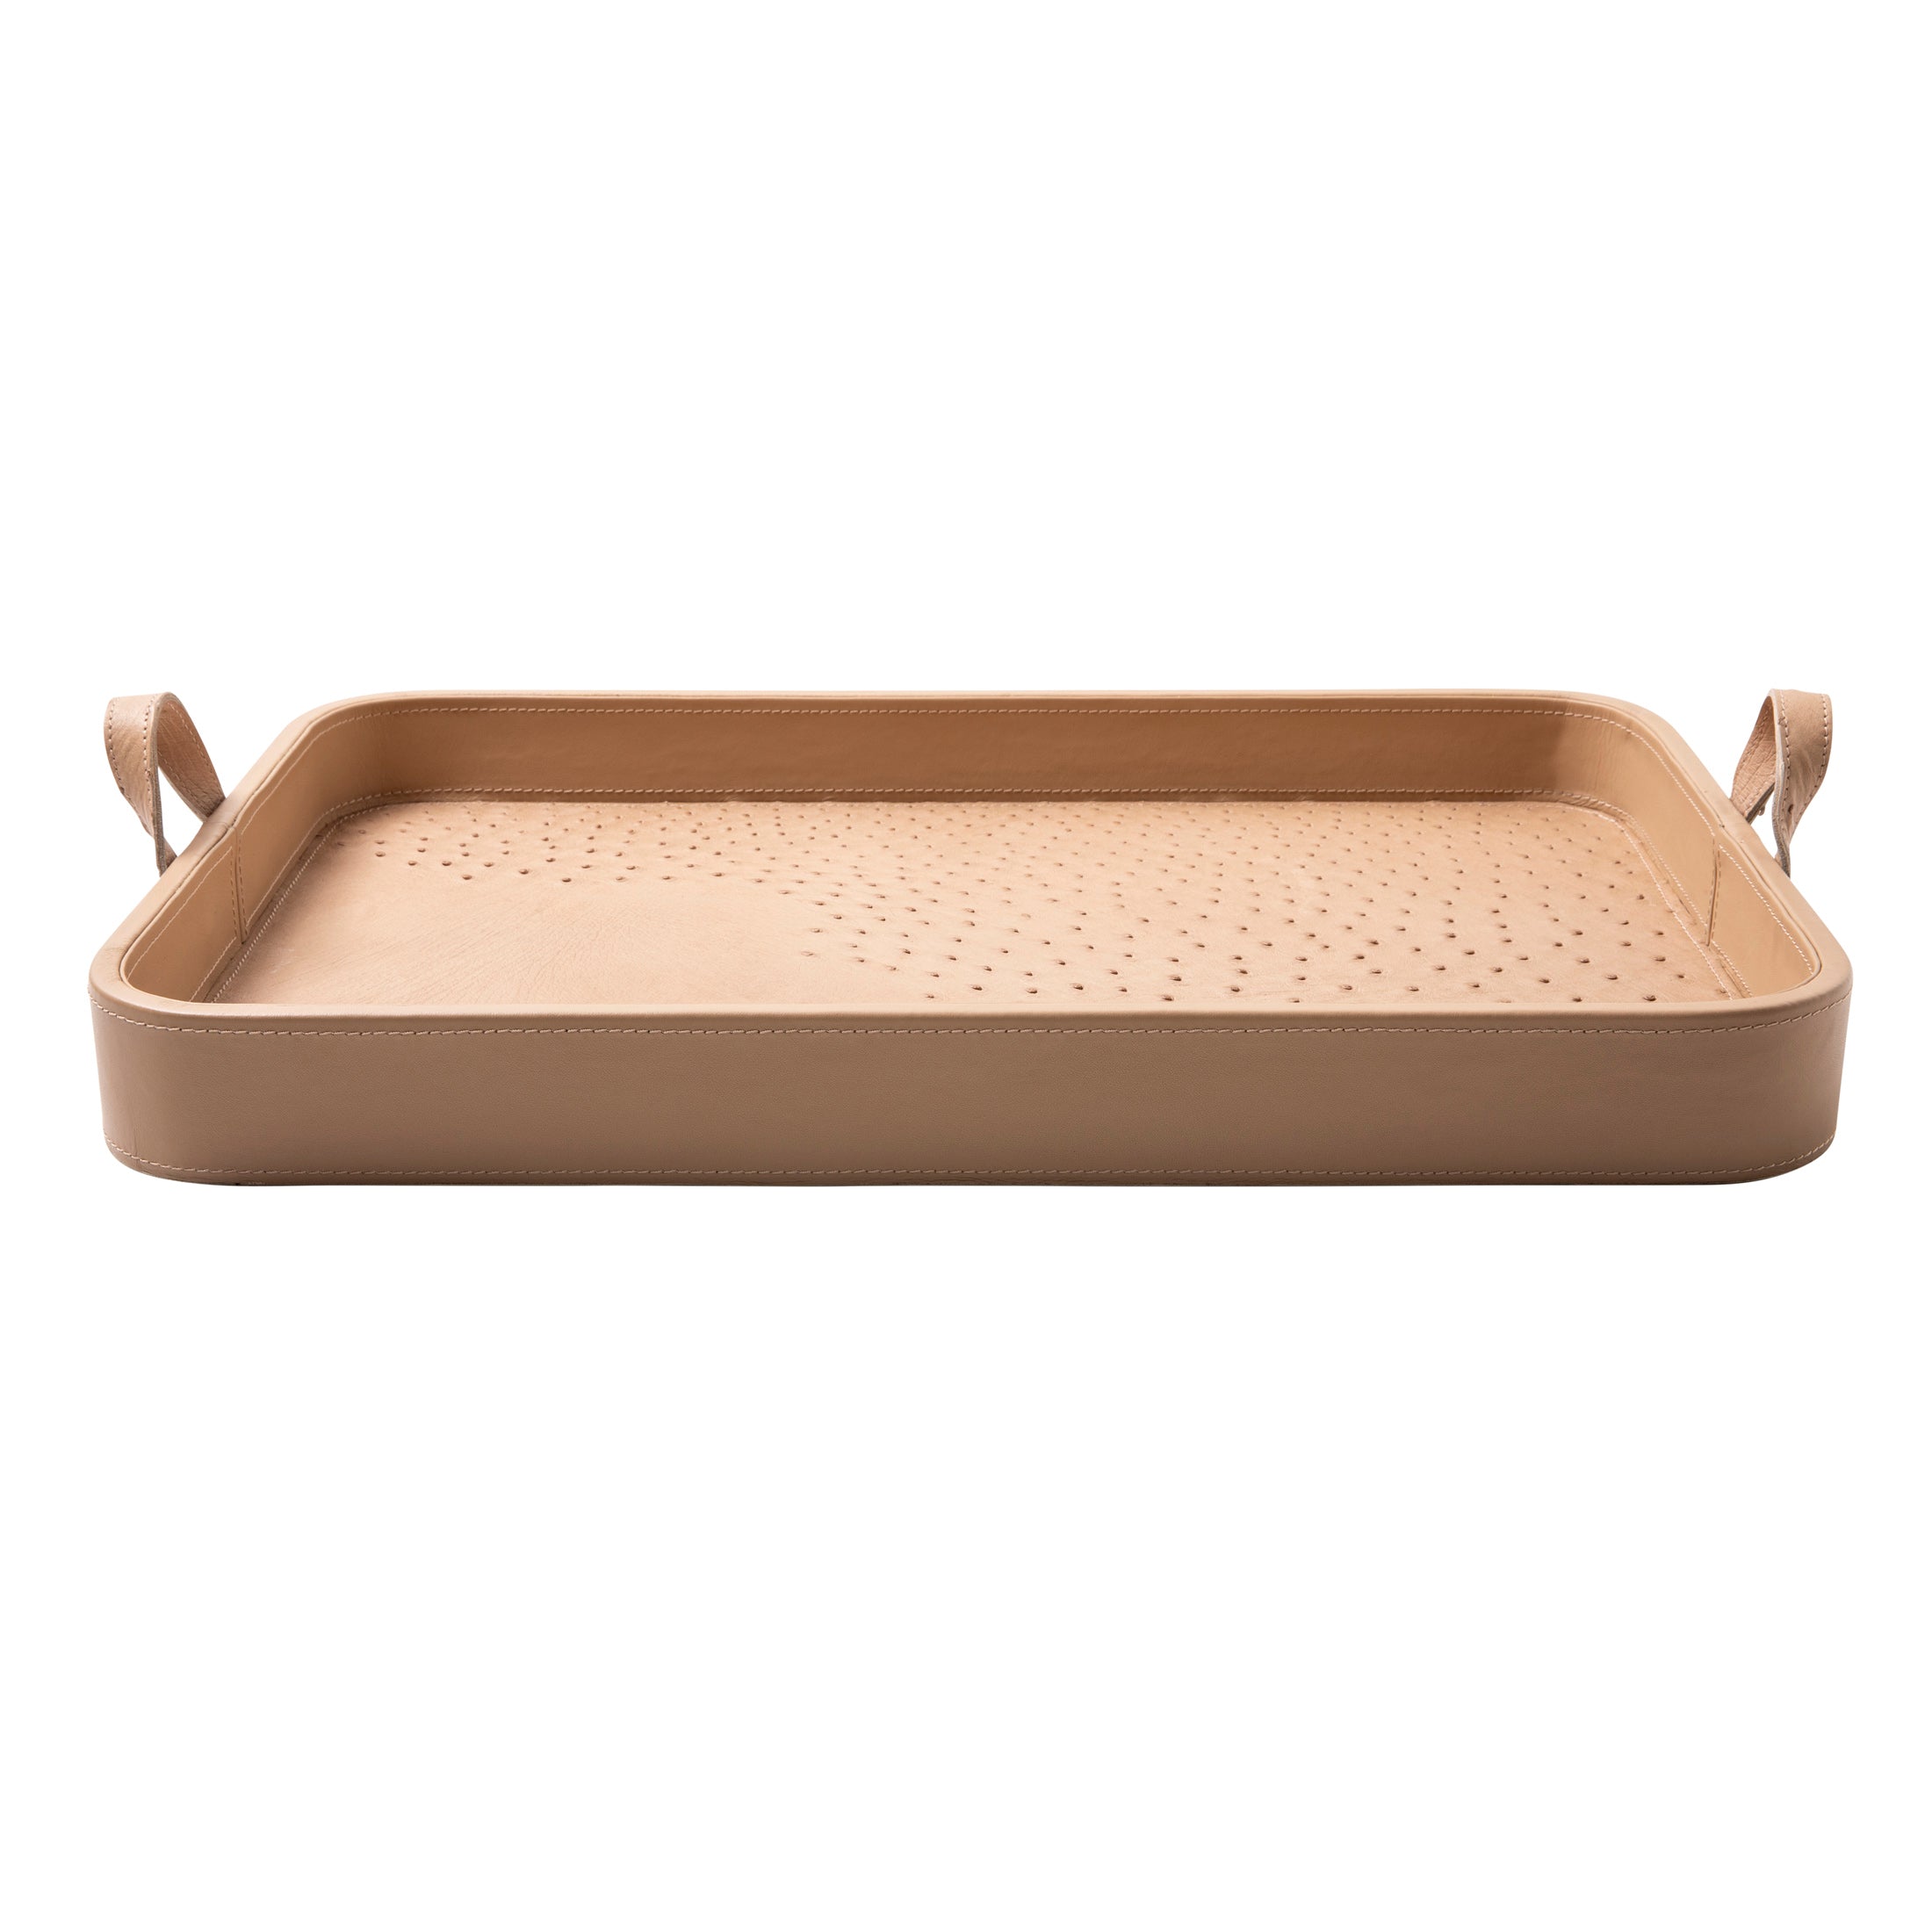 Ostrich Leather Inlay Tray - Cream